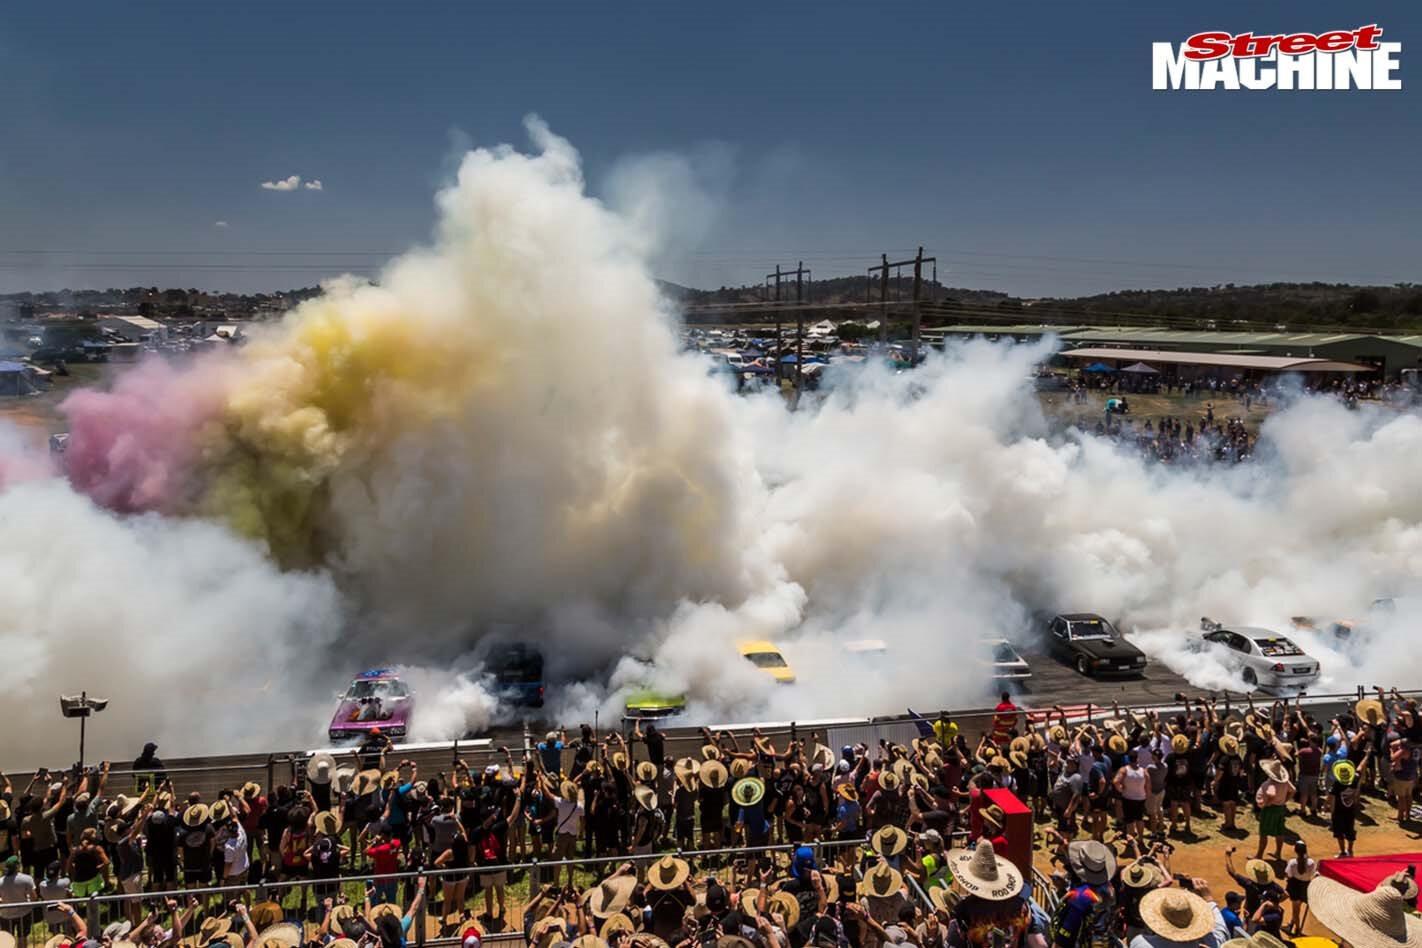 Americans to attempt biggest burnout world record – Video